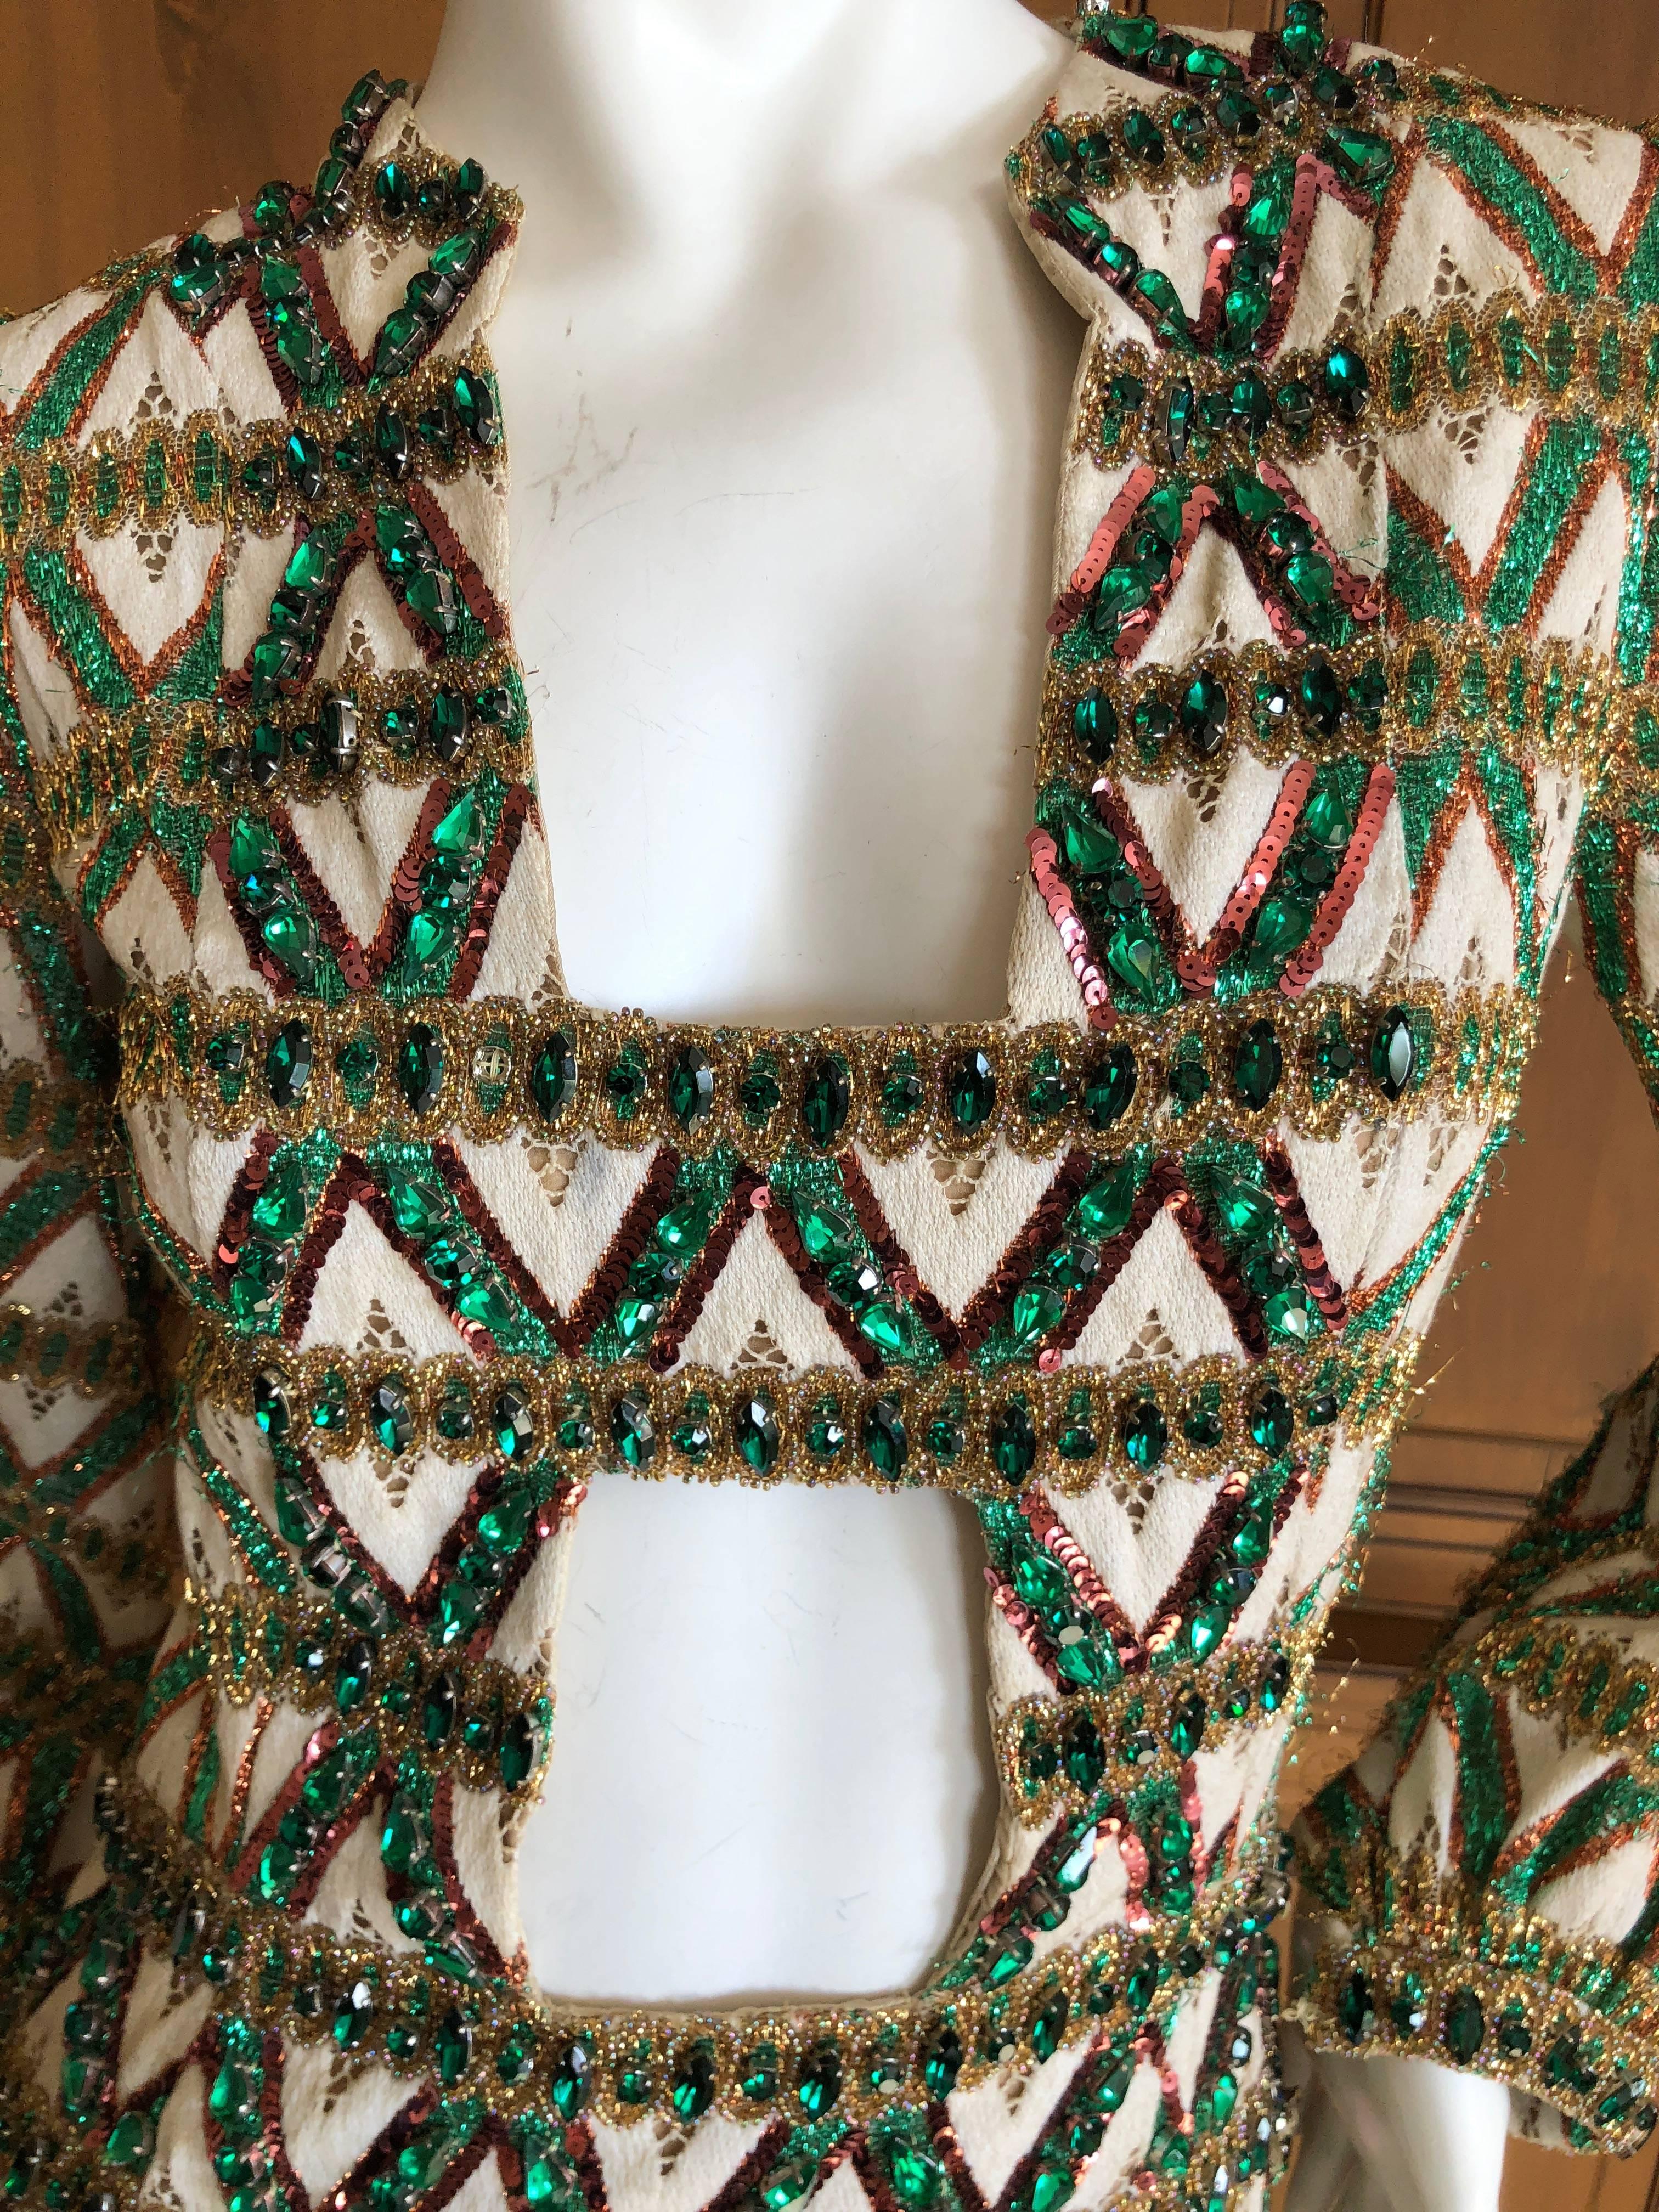 Cardinali Trelliage Pattern Key Hole Jumpsuit with Large Emerald Crystals For Sale 7